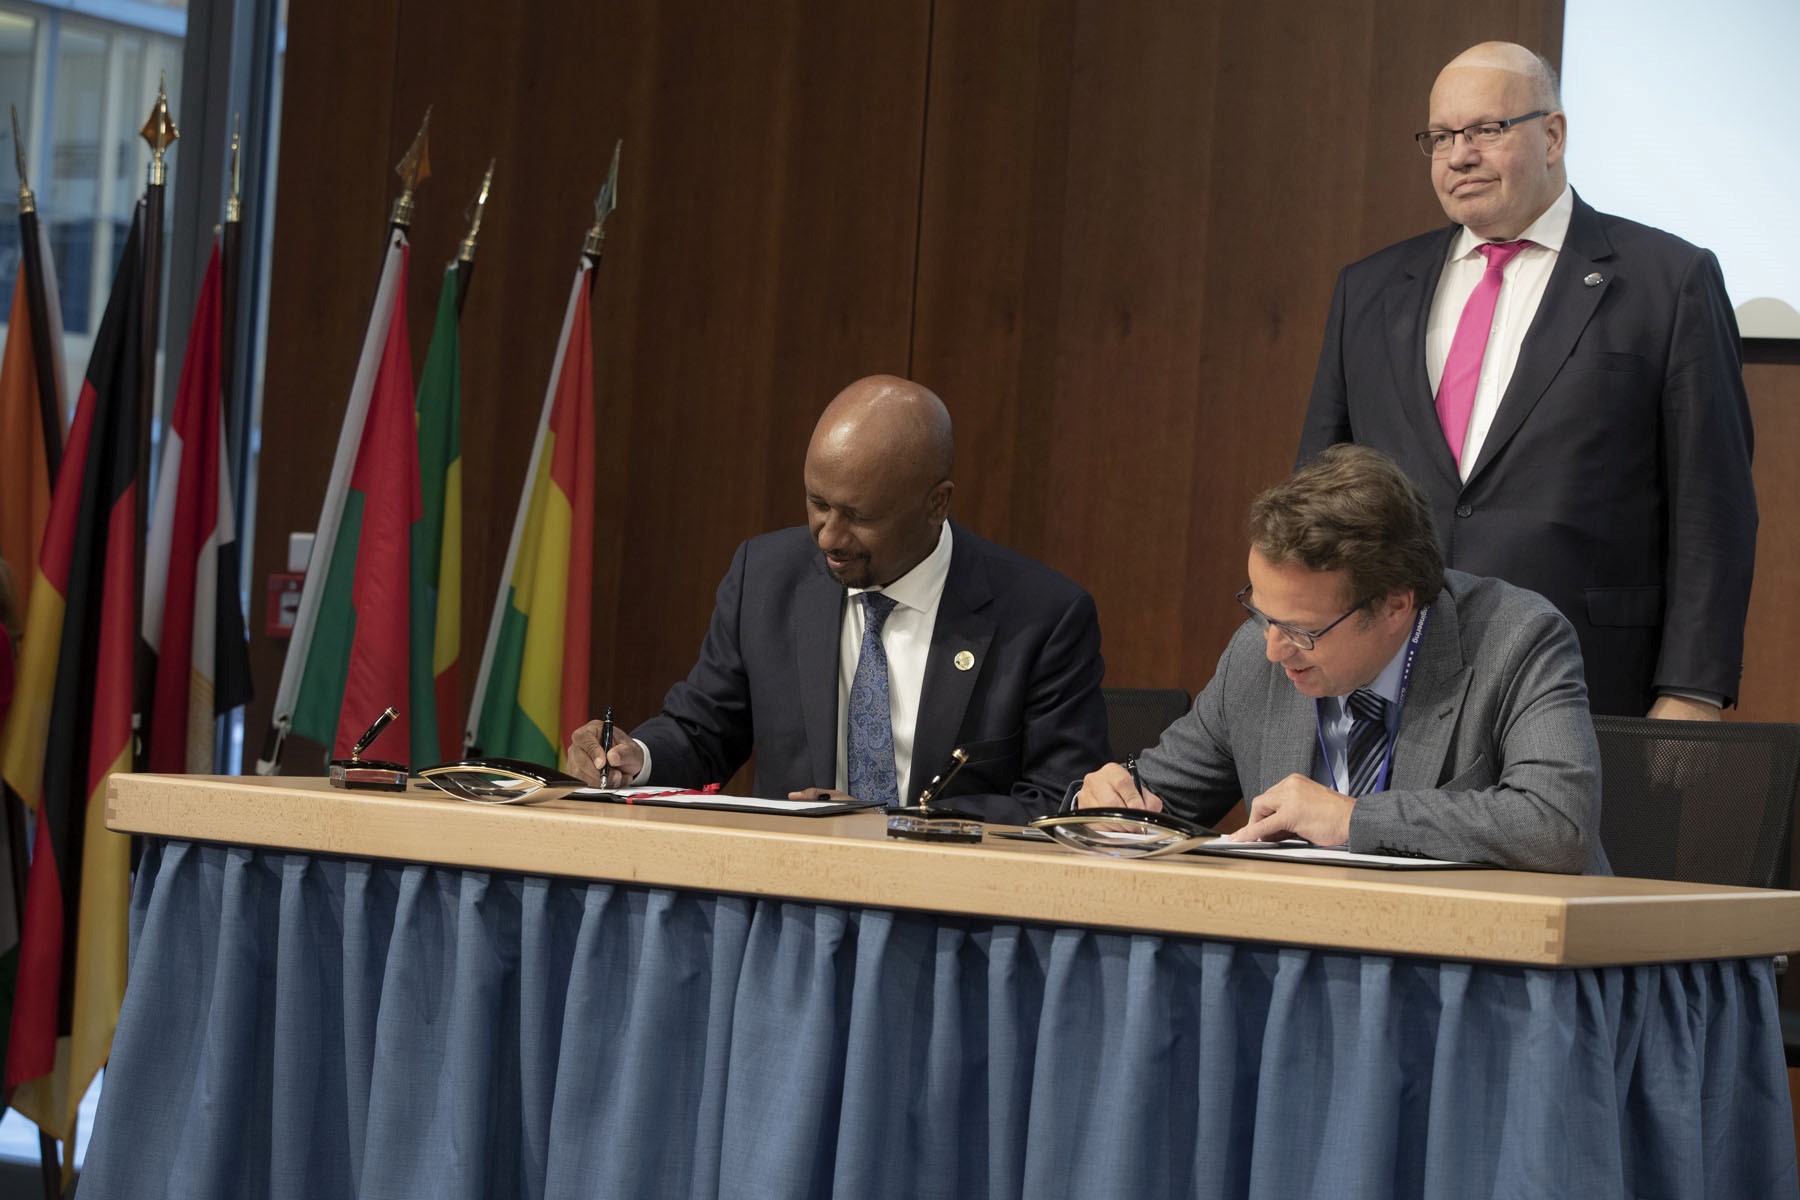 (from left to right) Dr. Seleshi Bekele, Ethiopian Minister of Water, Irrigation and Electricity, and Mark Claessen, Managing Director Voith Hydro East Africa in the attendance of Peter Altmaier, German Federal Minister for Economics and Energy.